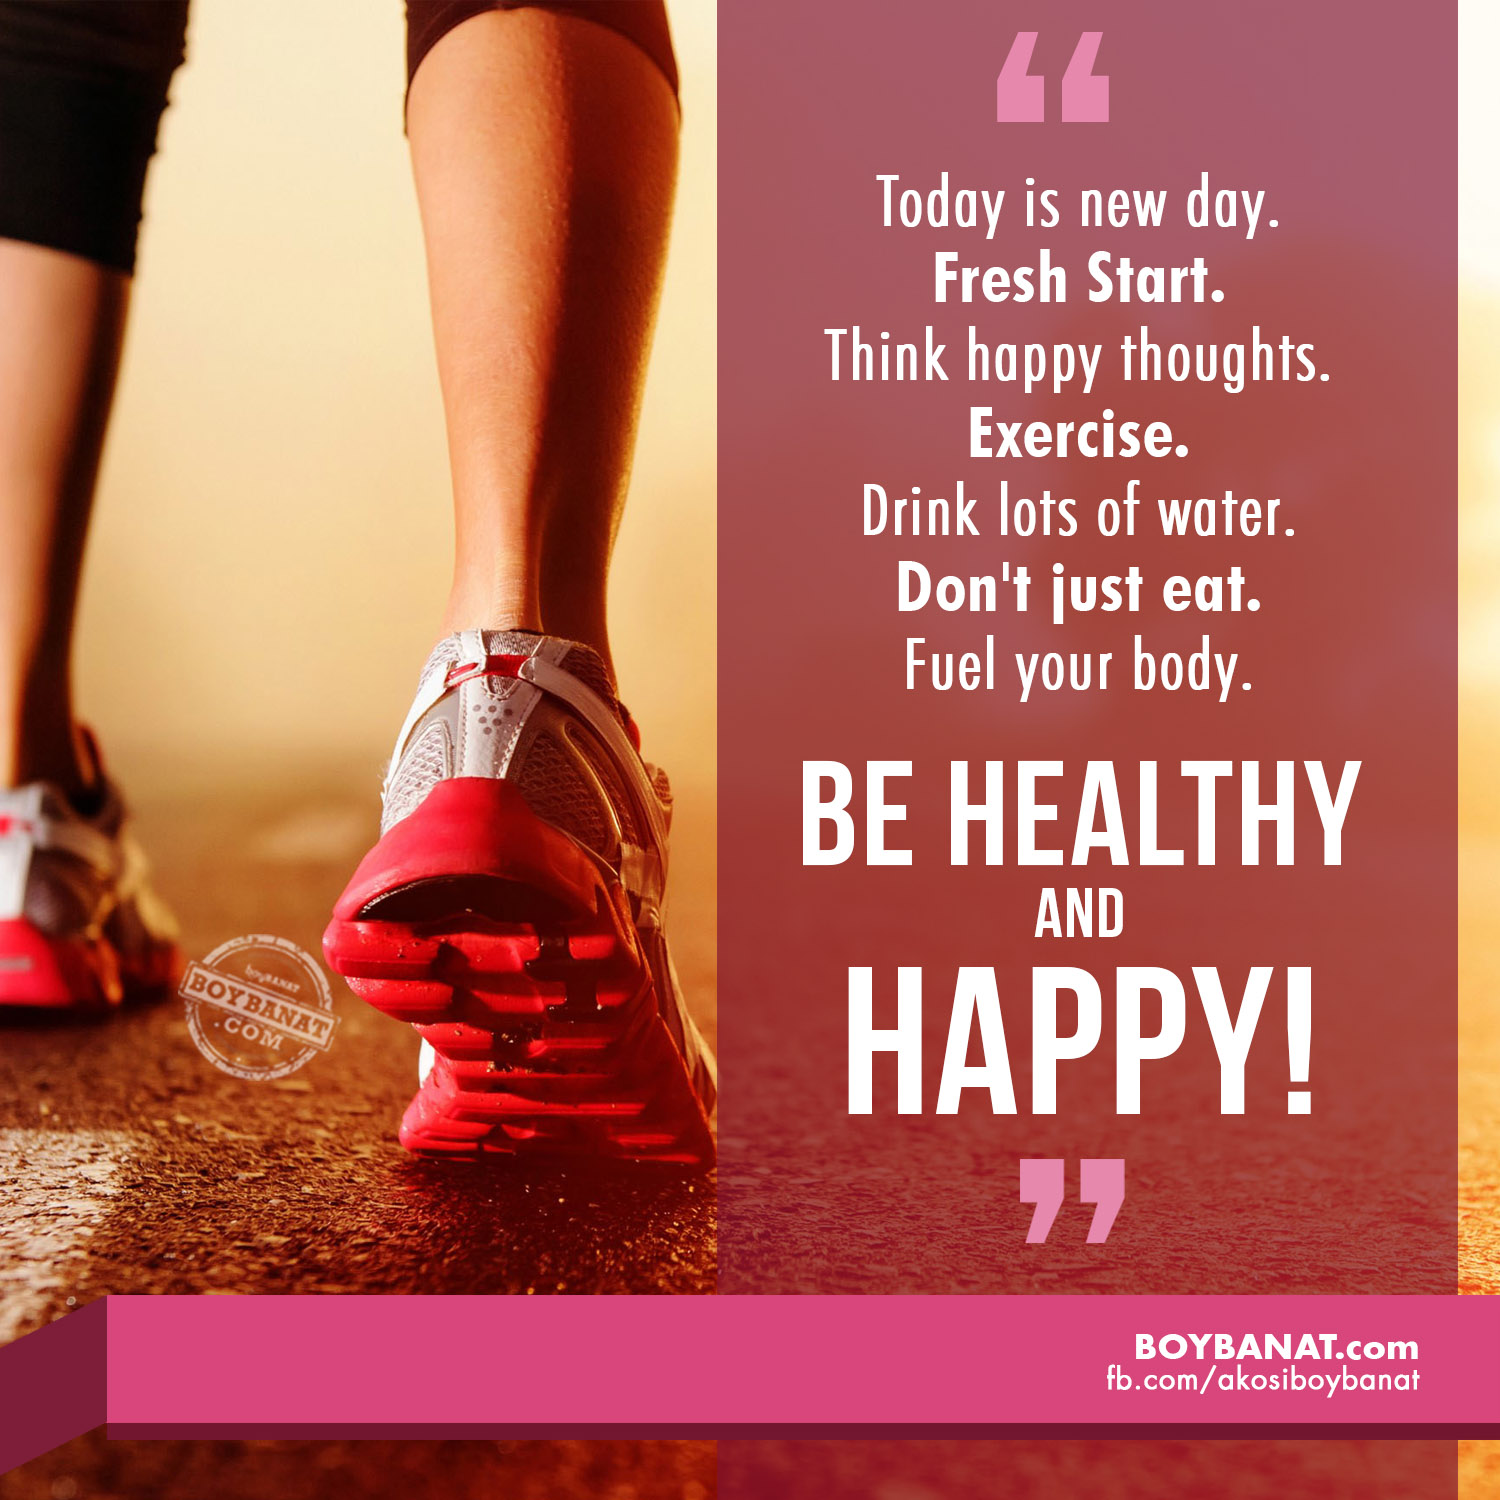 Health Quotes and Sayings That You Should Always Consider ~ Boy Banat